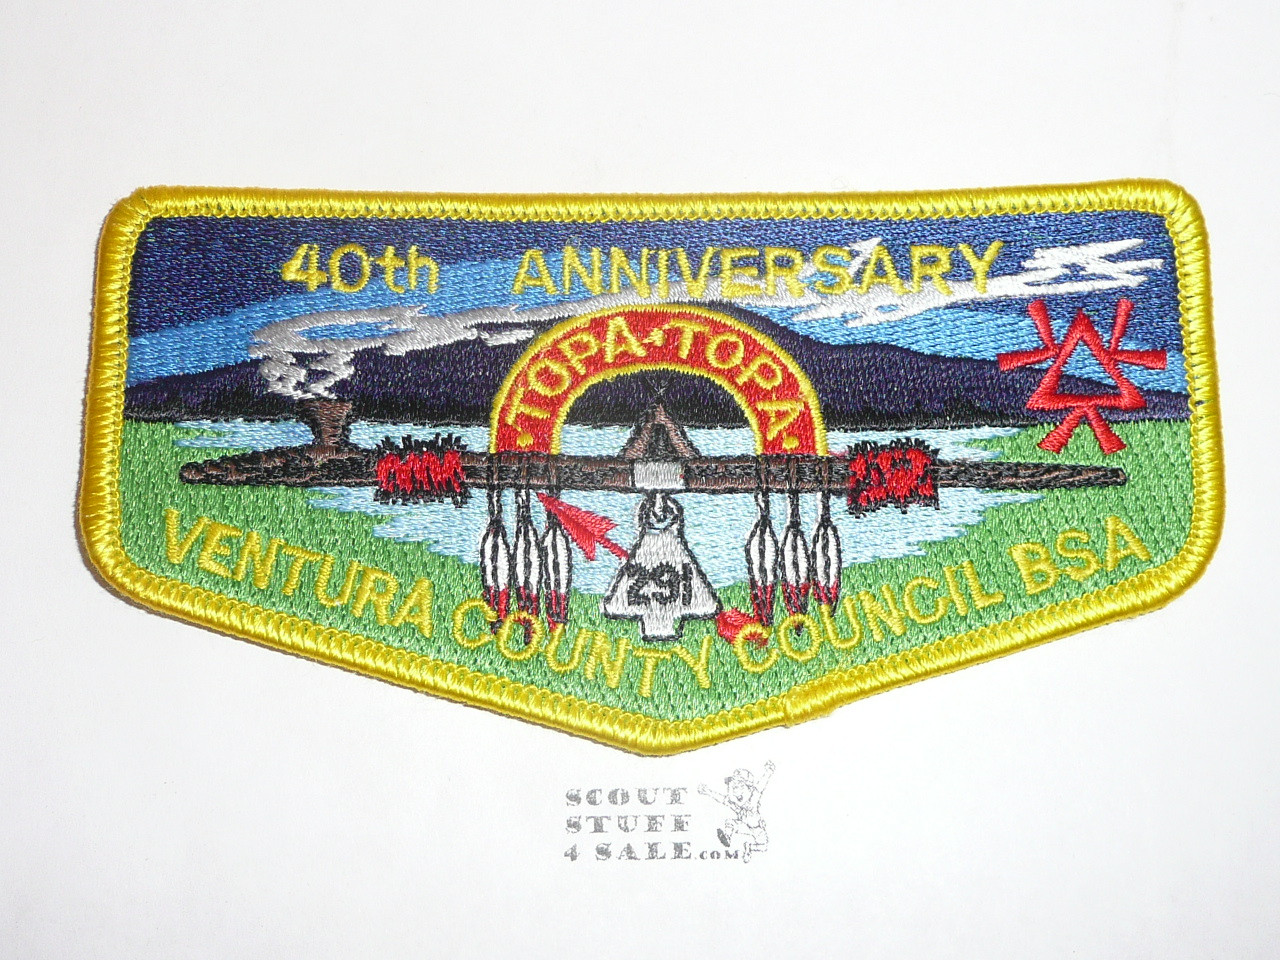 Order of the Arrow Lodge #291 Topa Topa s27 40th anniv Flap Patch